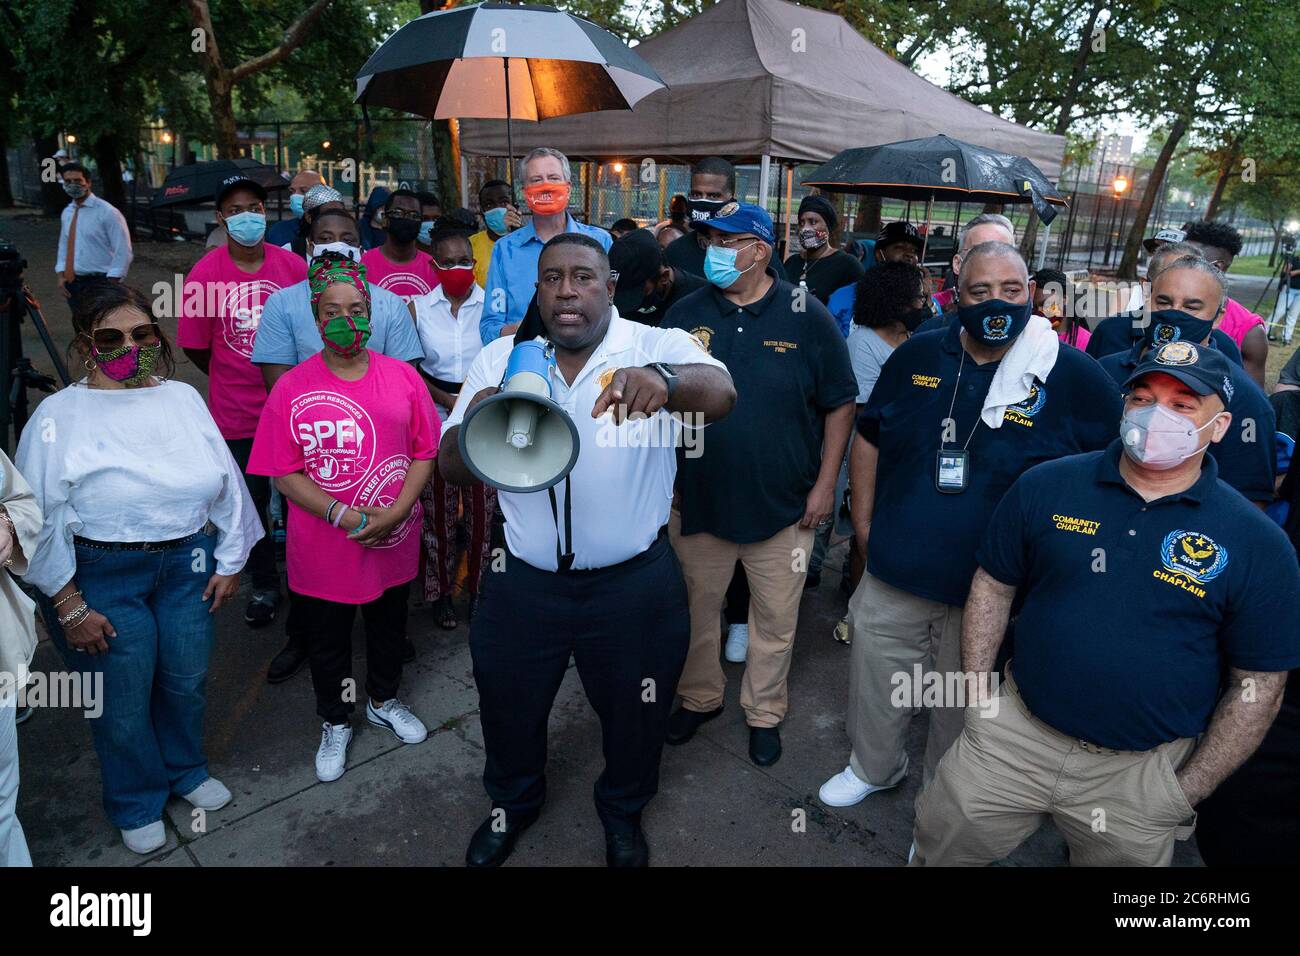 New York, United States. 11th July, 2020. NYPD Chief Jeffrey Maddrey speaks at Occupy the Corner rally in East Harlem in response on gun violence in New York on July 11, 2020. Gun violence in 2020 surged by more than 100% in New York City mostly in neighborhoods with high rate of poverty and high level of COVID-19 cases. Community activists and police department encreased presence in those areas in order to stop gun violence. (Photo by Lev Radin/Sipa USA) Credit: Sipa USA/Alamy Live News Stock Photo